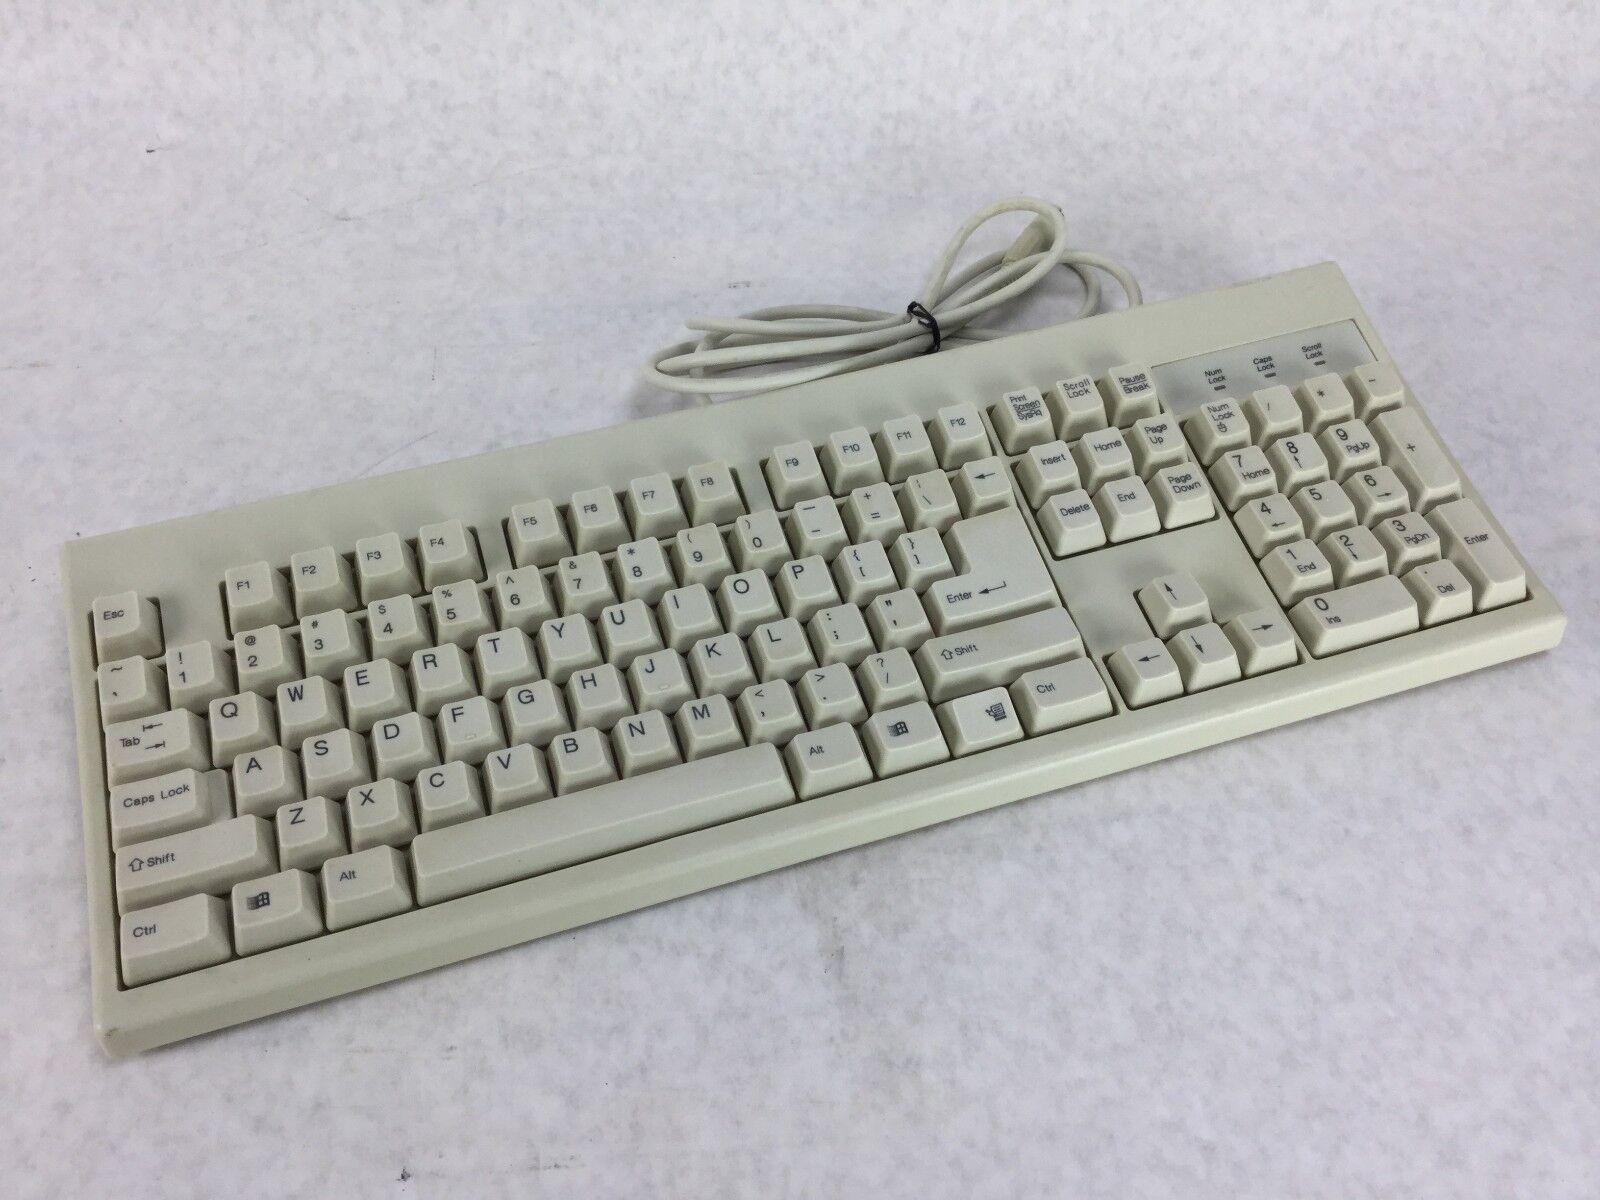 Chicony KB-2961 Wired PS/2 Keyboard Beige